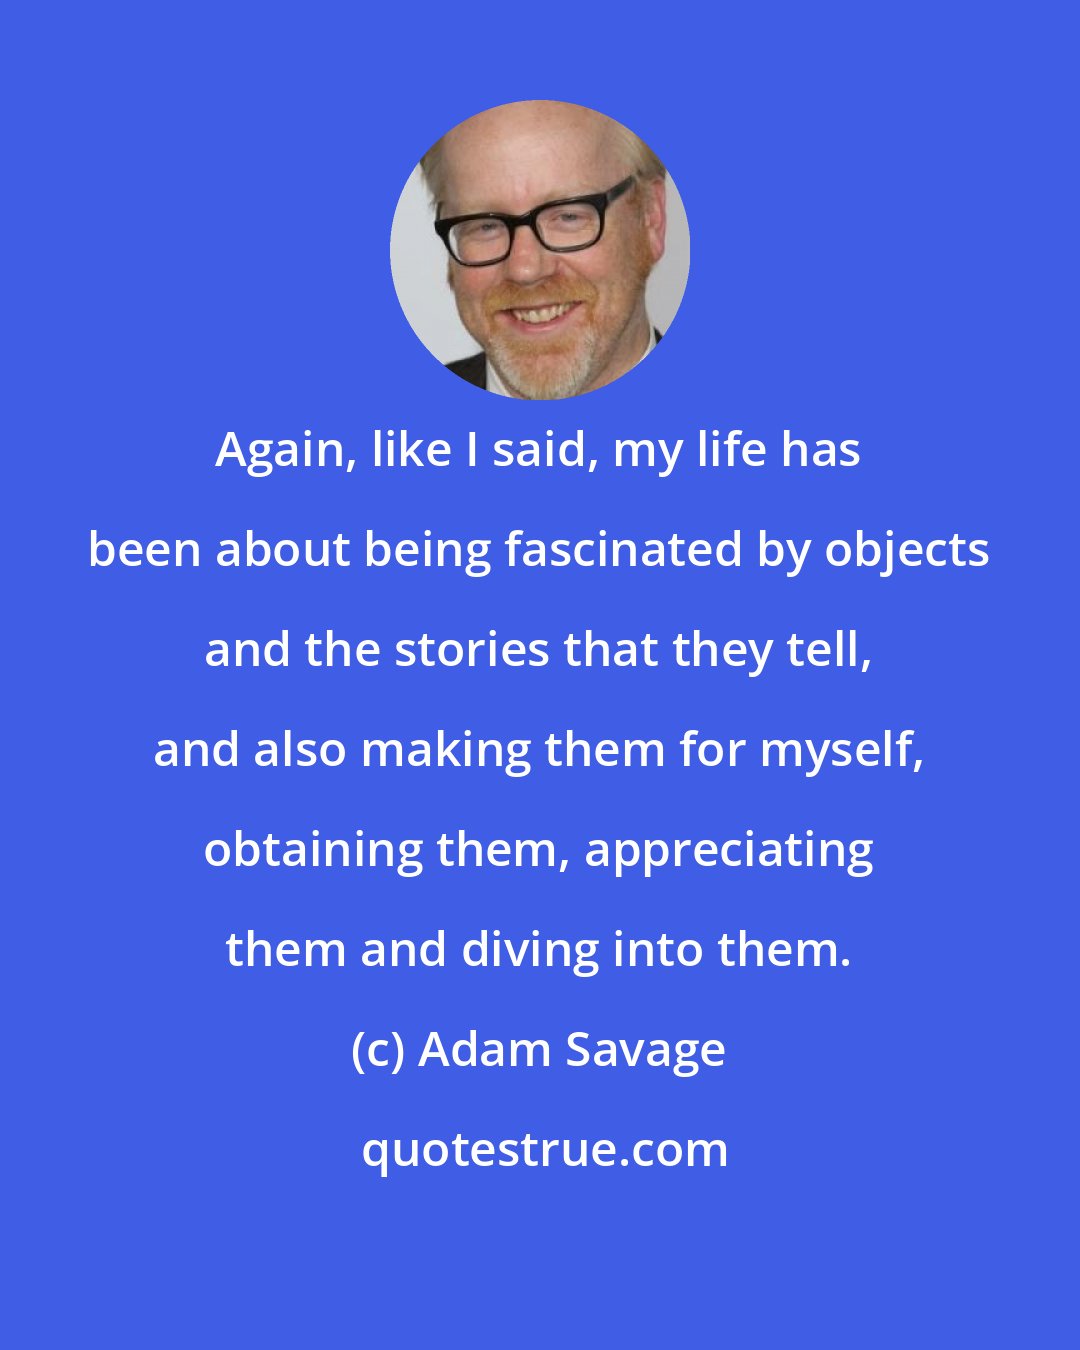 Adam Savage: Again, like I said, my life has been about being fascinated by objects and the stories that they tell, and also making them for myself, obtaining them, appreciating them and diving into them.